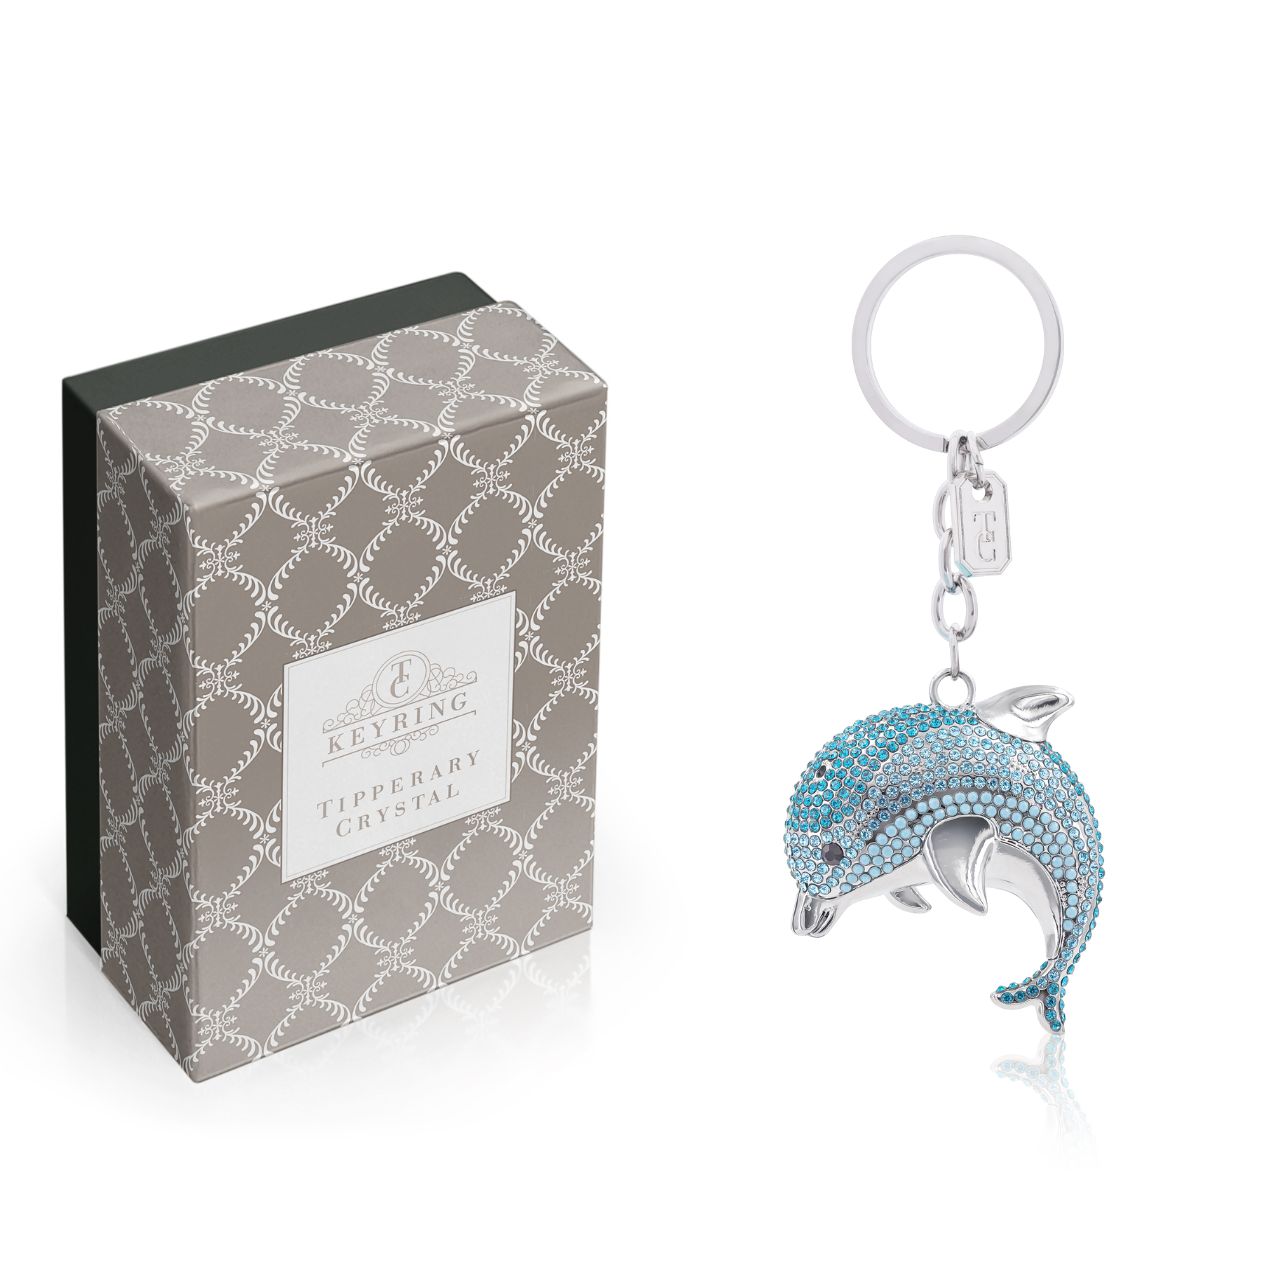 Blue Dolphin Keyring by Tipperary Crystal  Transform your keys to a fashion statement with this beautiful Blue Dolphin keyring.